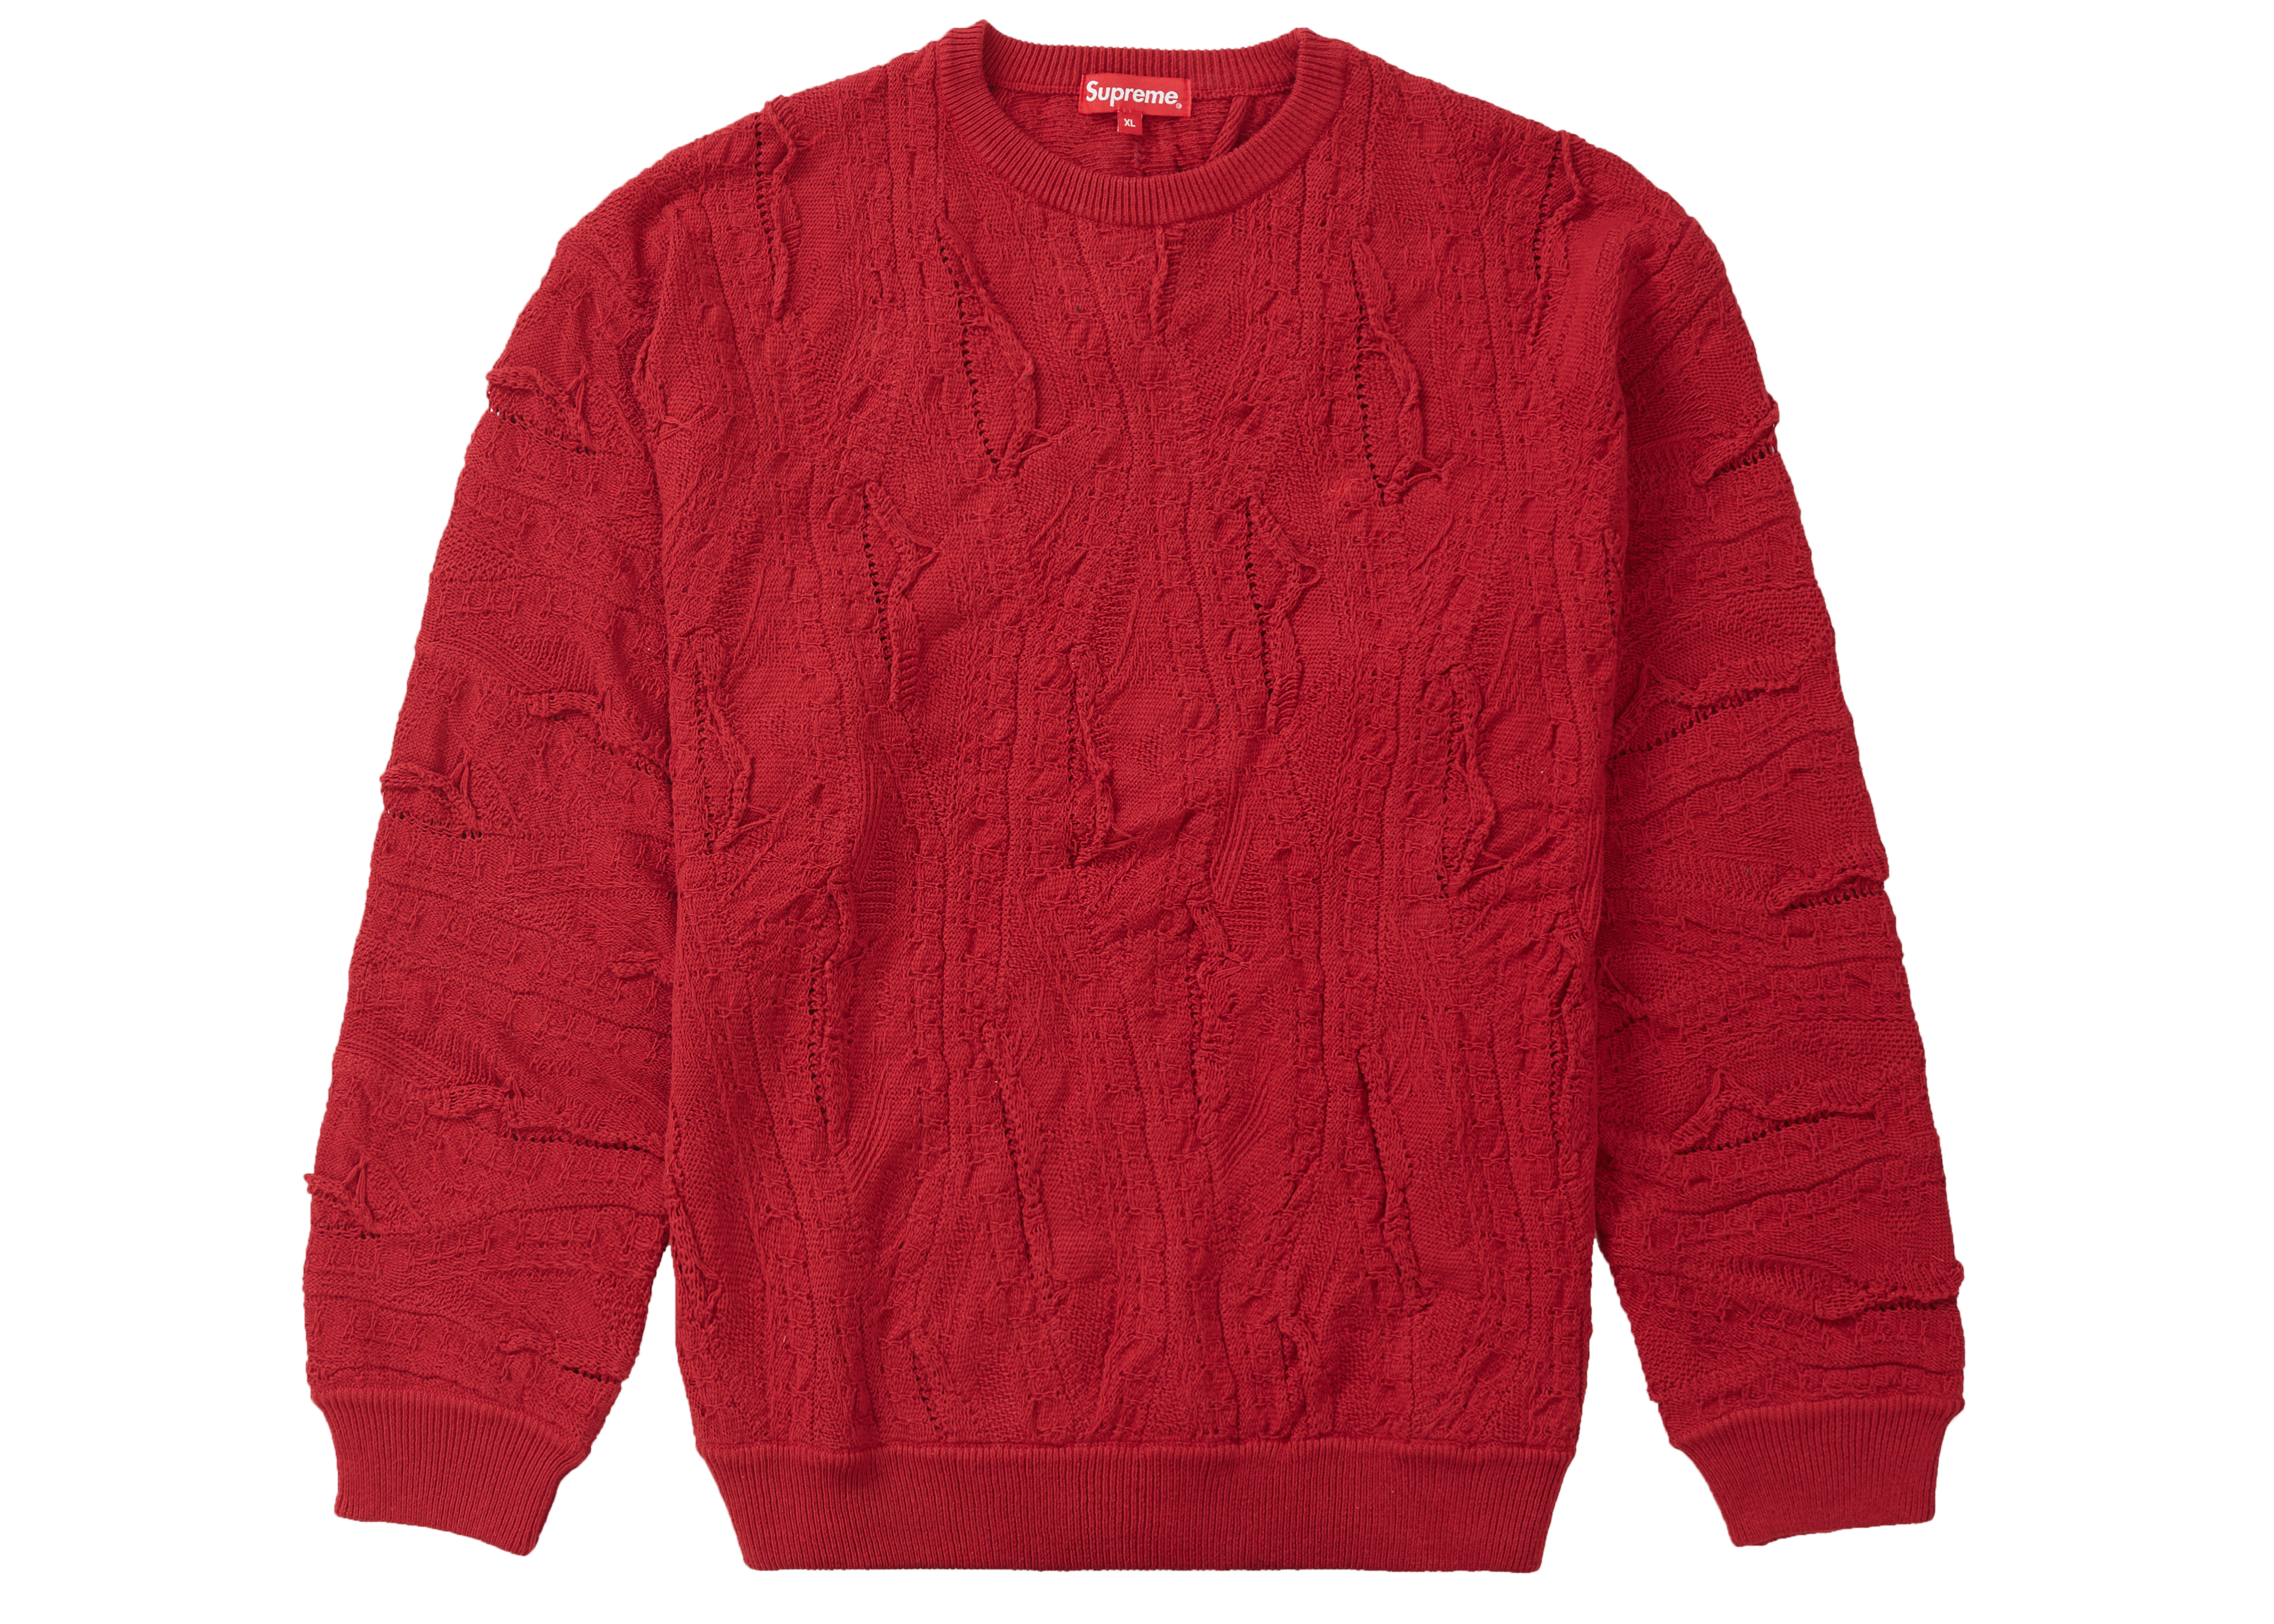 Supreme Textured Pattern Sweater Red - SS19 Men's - US